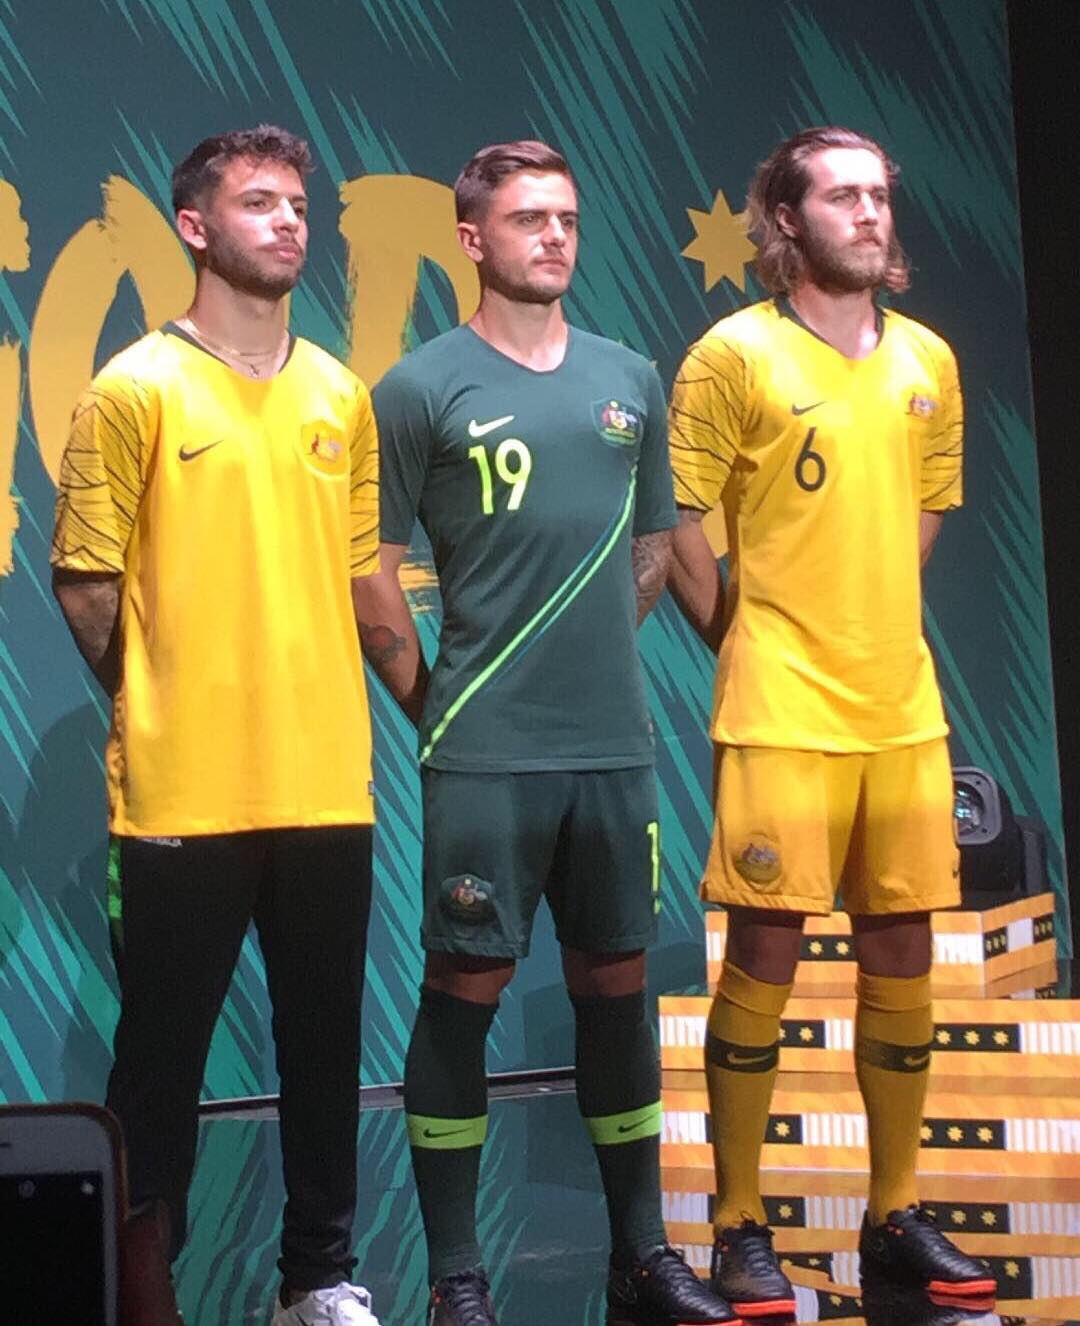 audit tiran Aquarium GOAL on Twitter: "What are your thoughts on Australia's NIKE 2018 World Cup  kits? #Socceroos https://t.co/h9pc8UGho6" / Twitter